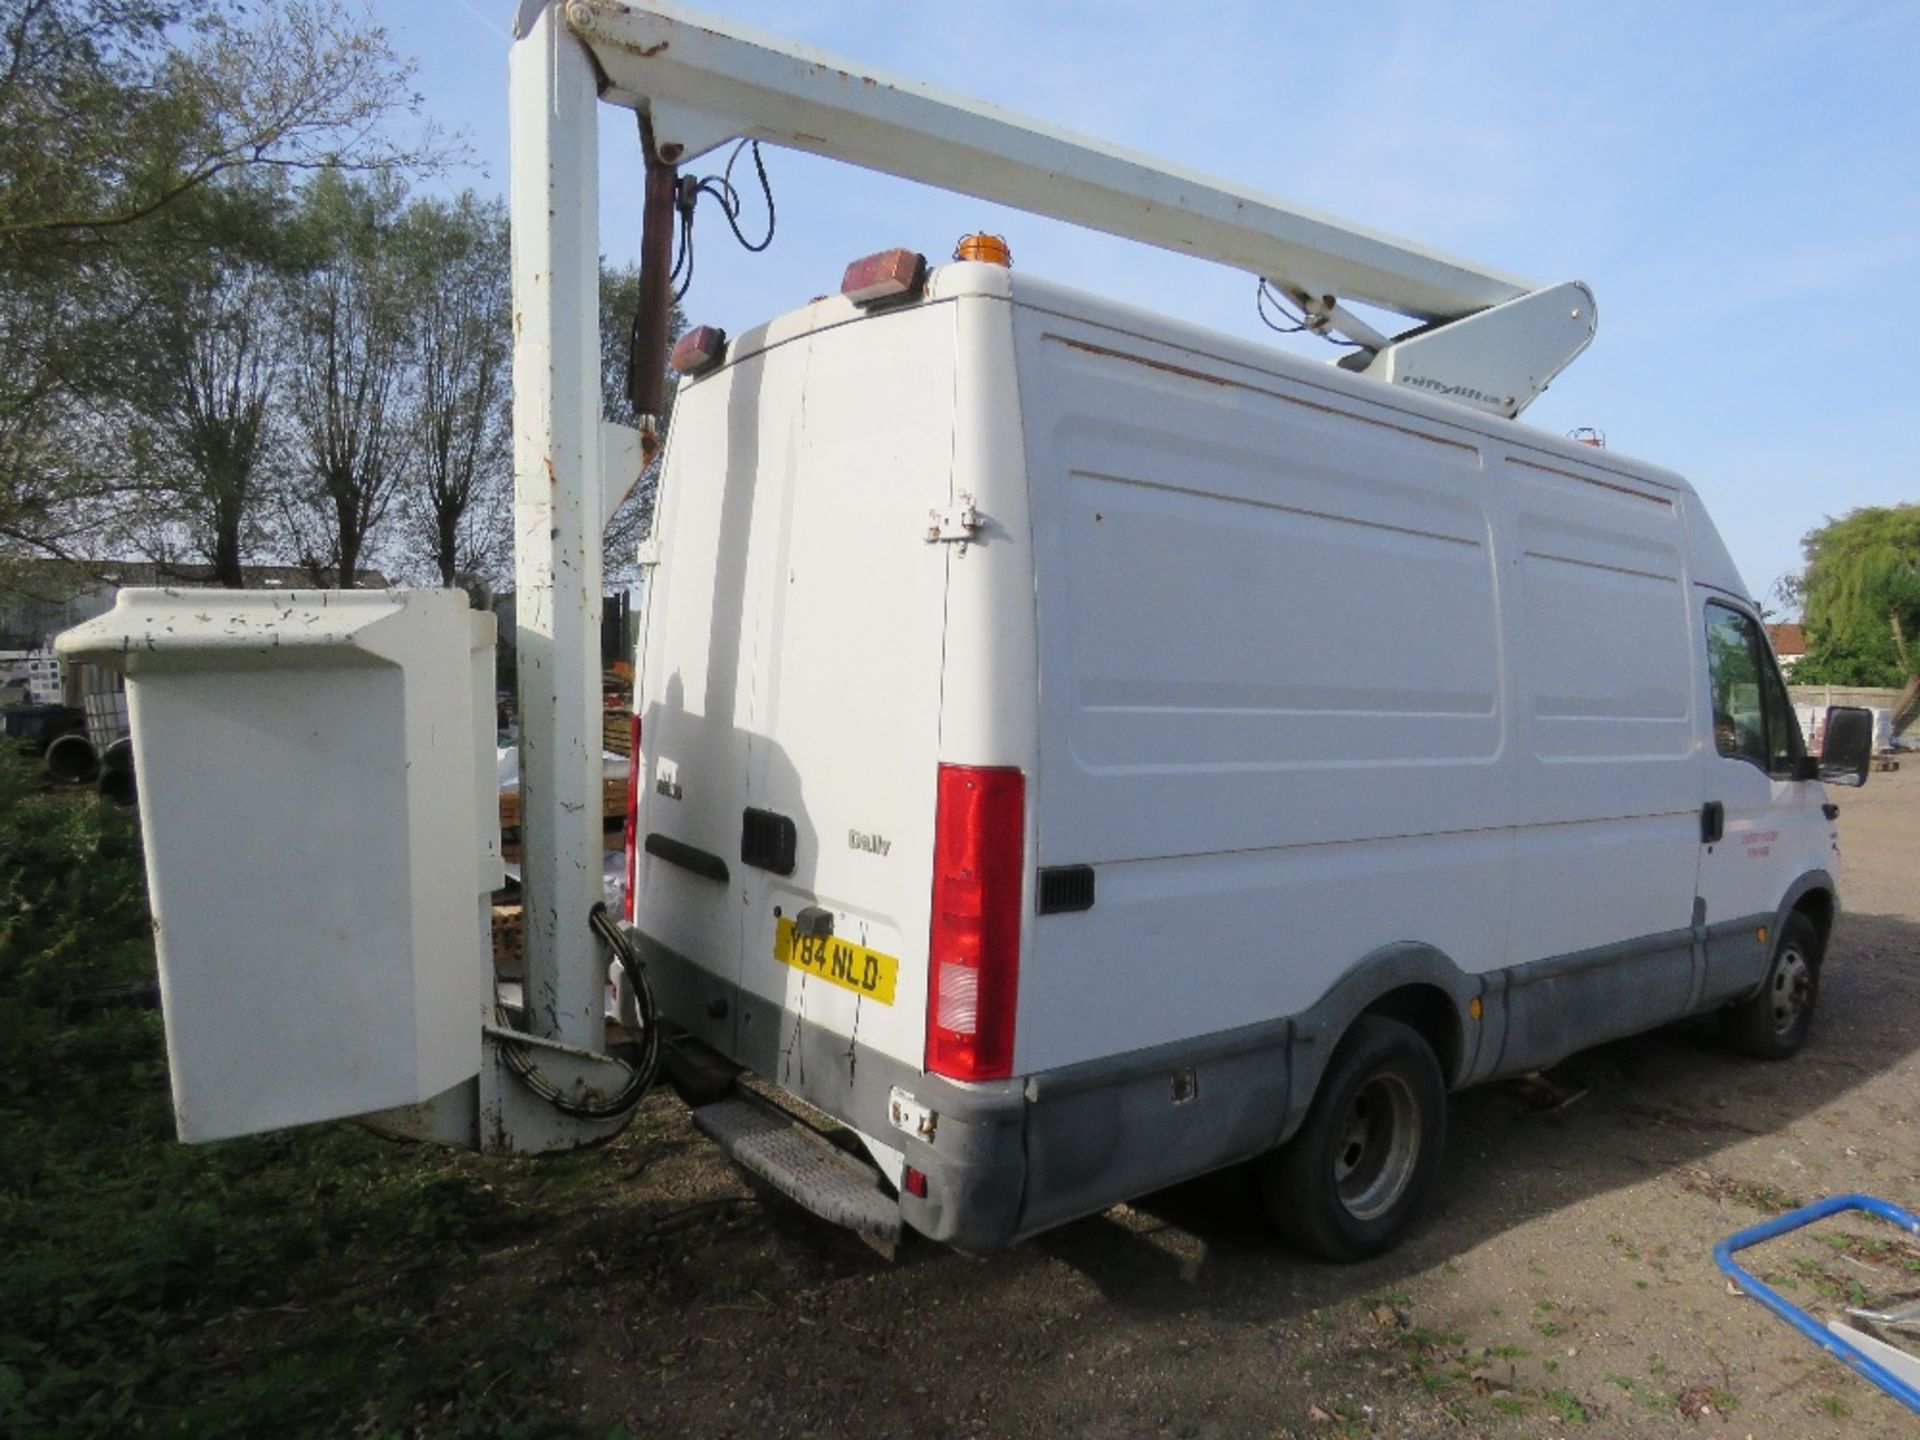 IVECO DAILY CHERRY PICKER VAN REG:Y84 NLD. WITH V5 AND PLATING CERTIFICATE, REGISTERED AS TOWER TRUC - Image 9 of 10